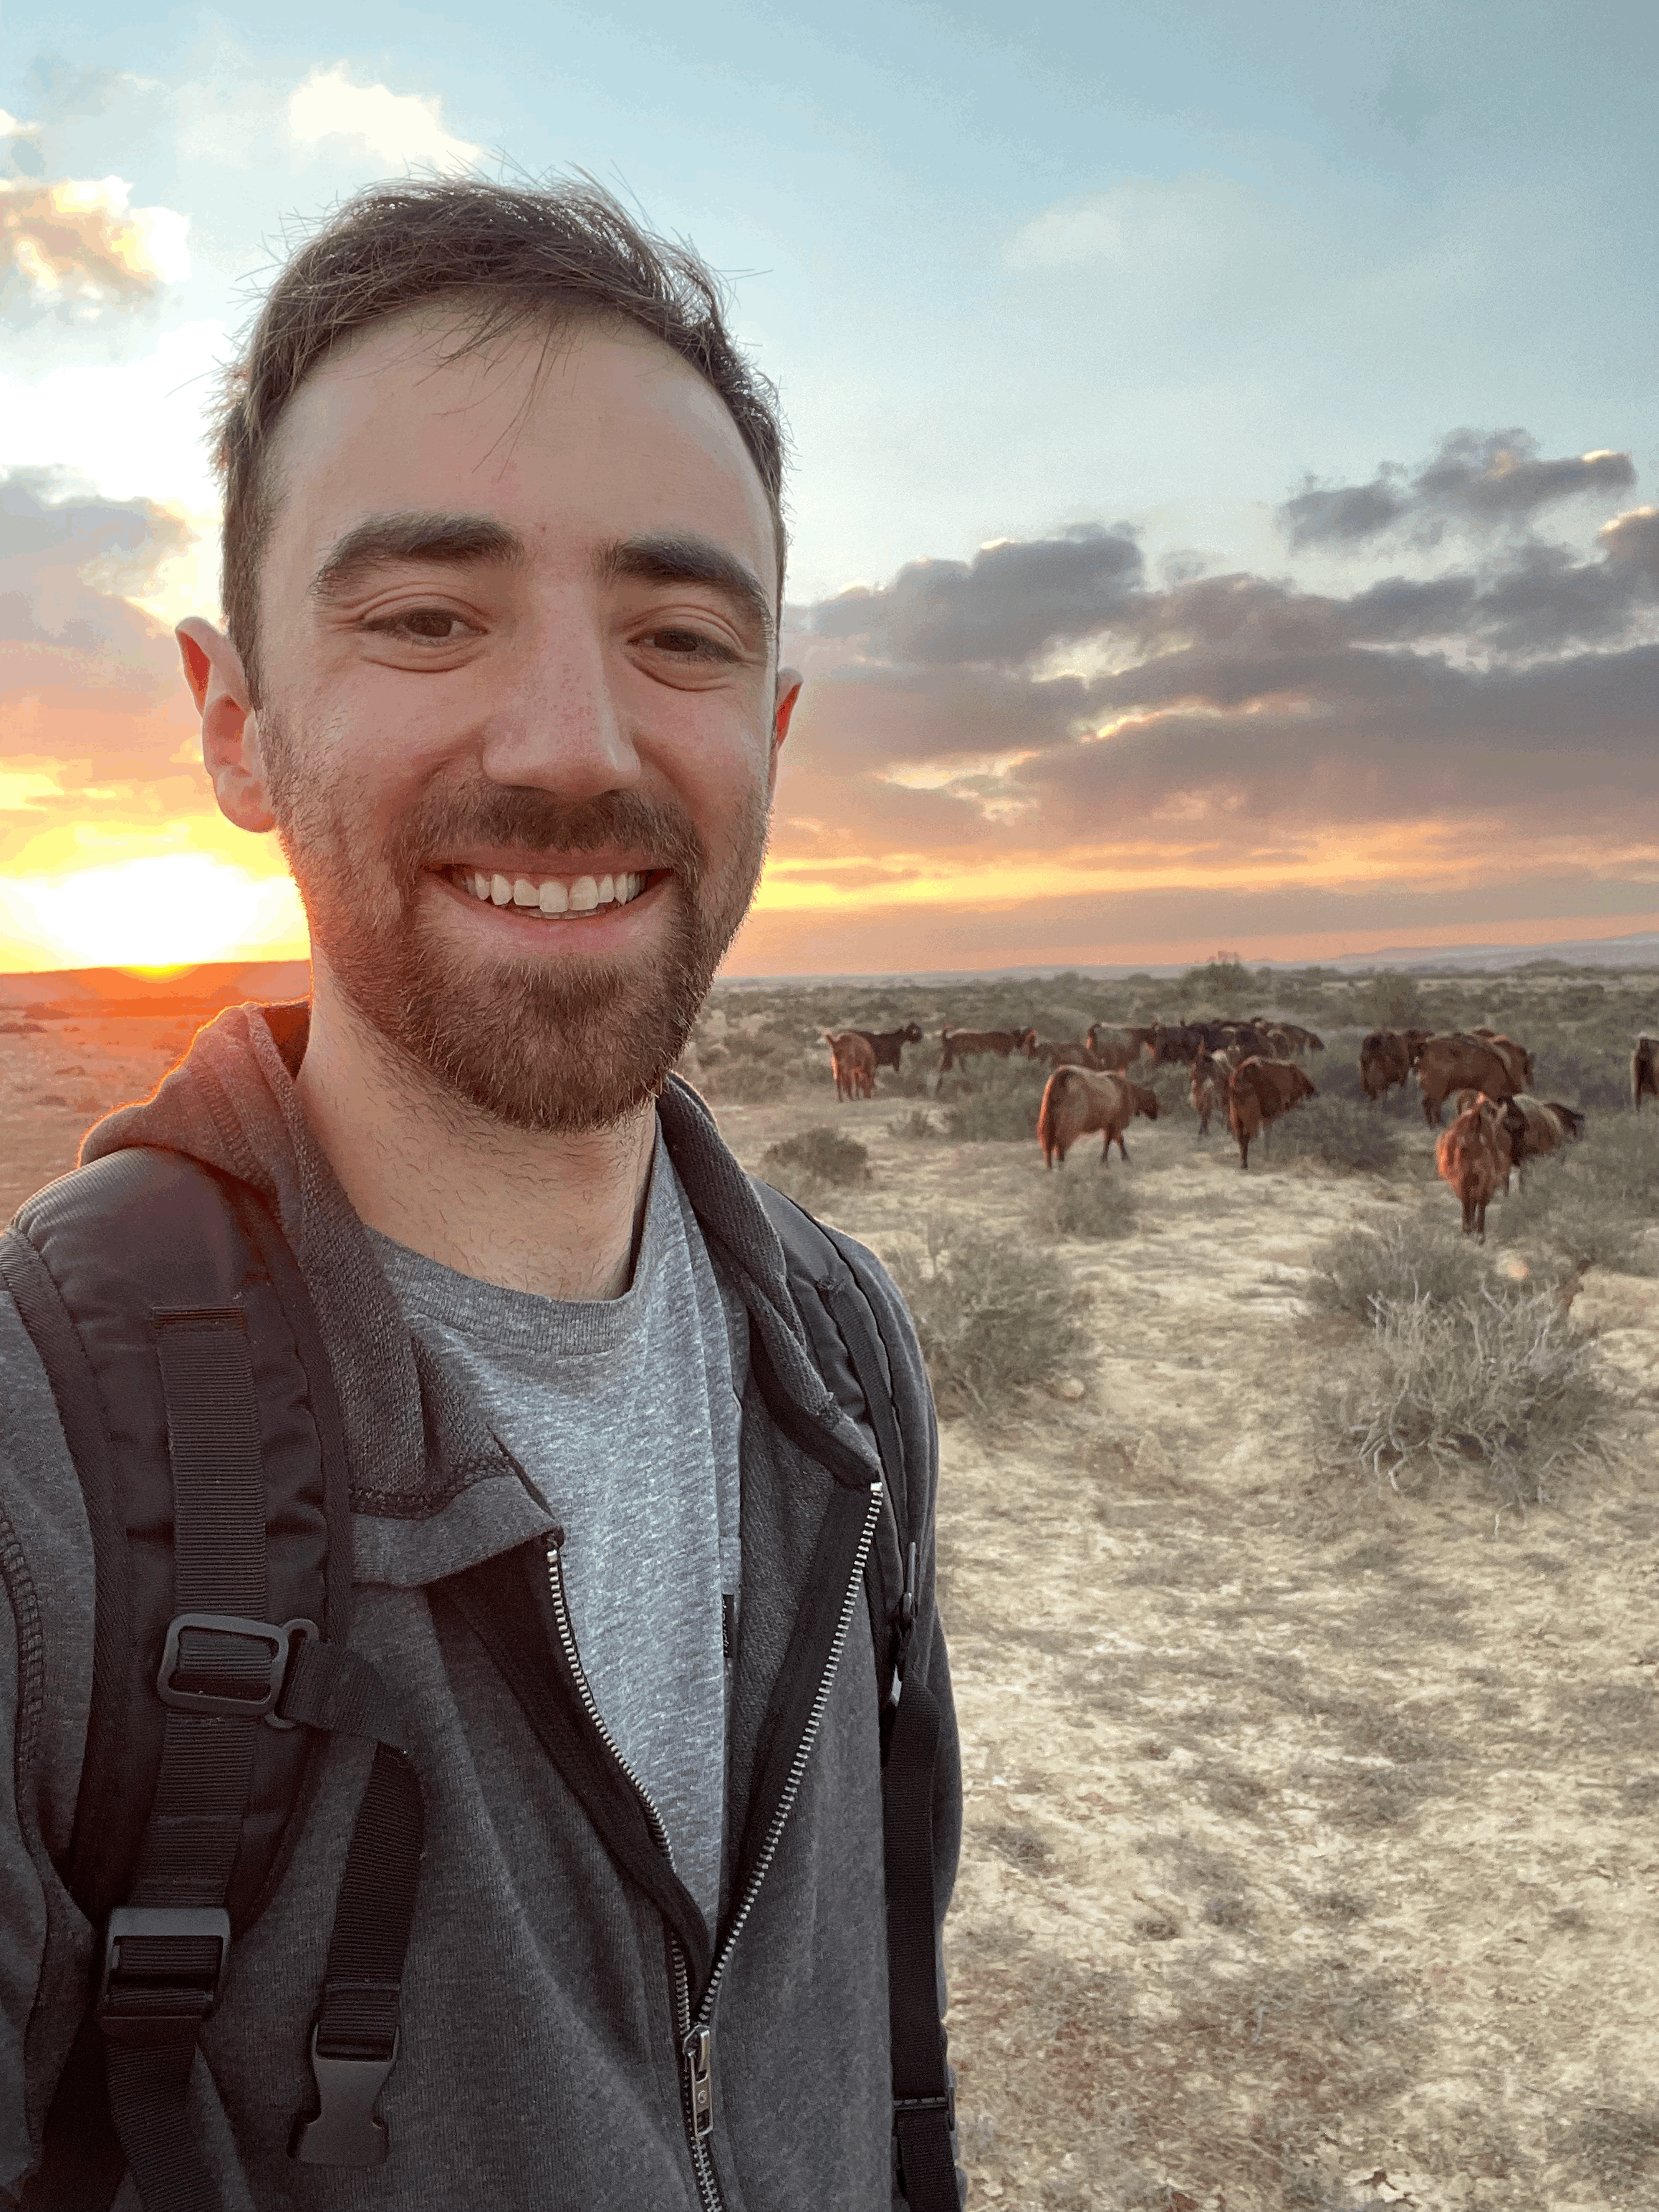 Jacob smiling in the desert at sunrise with 75 goats